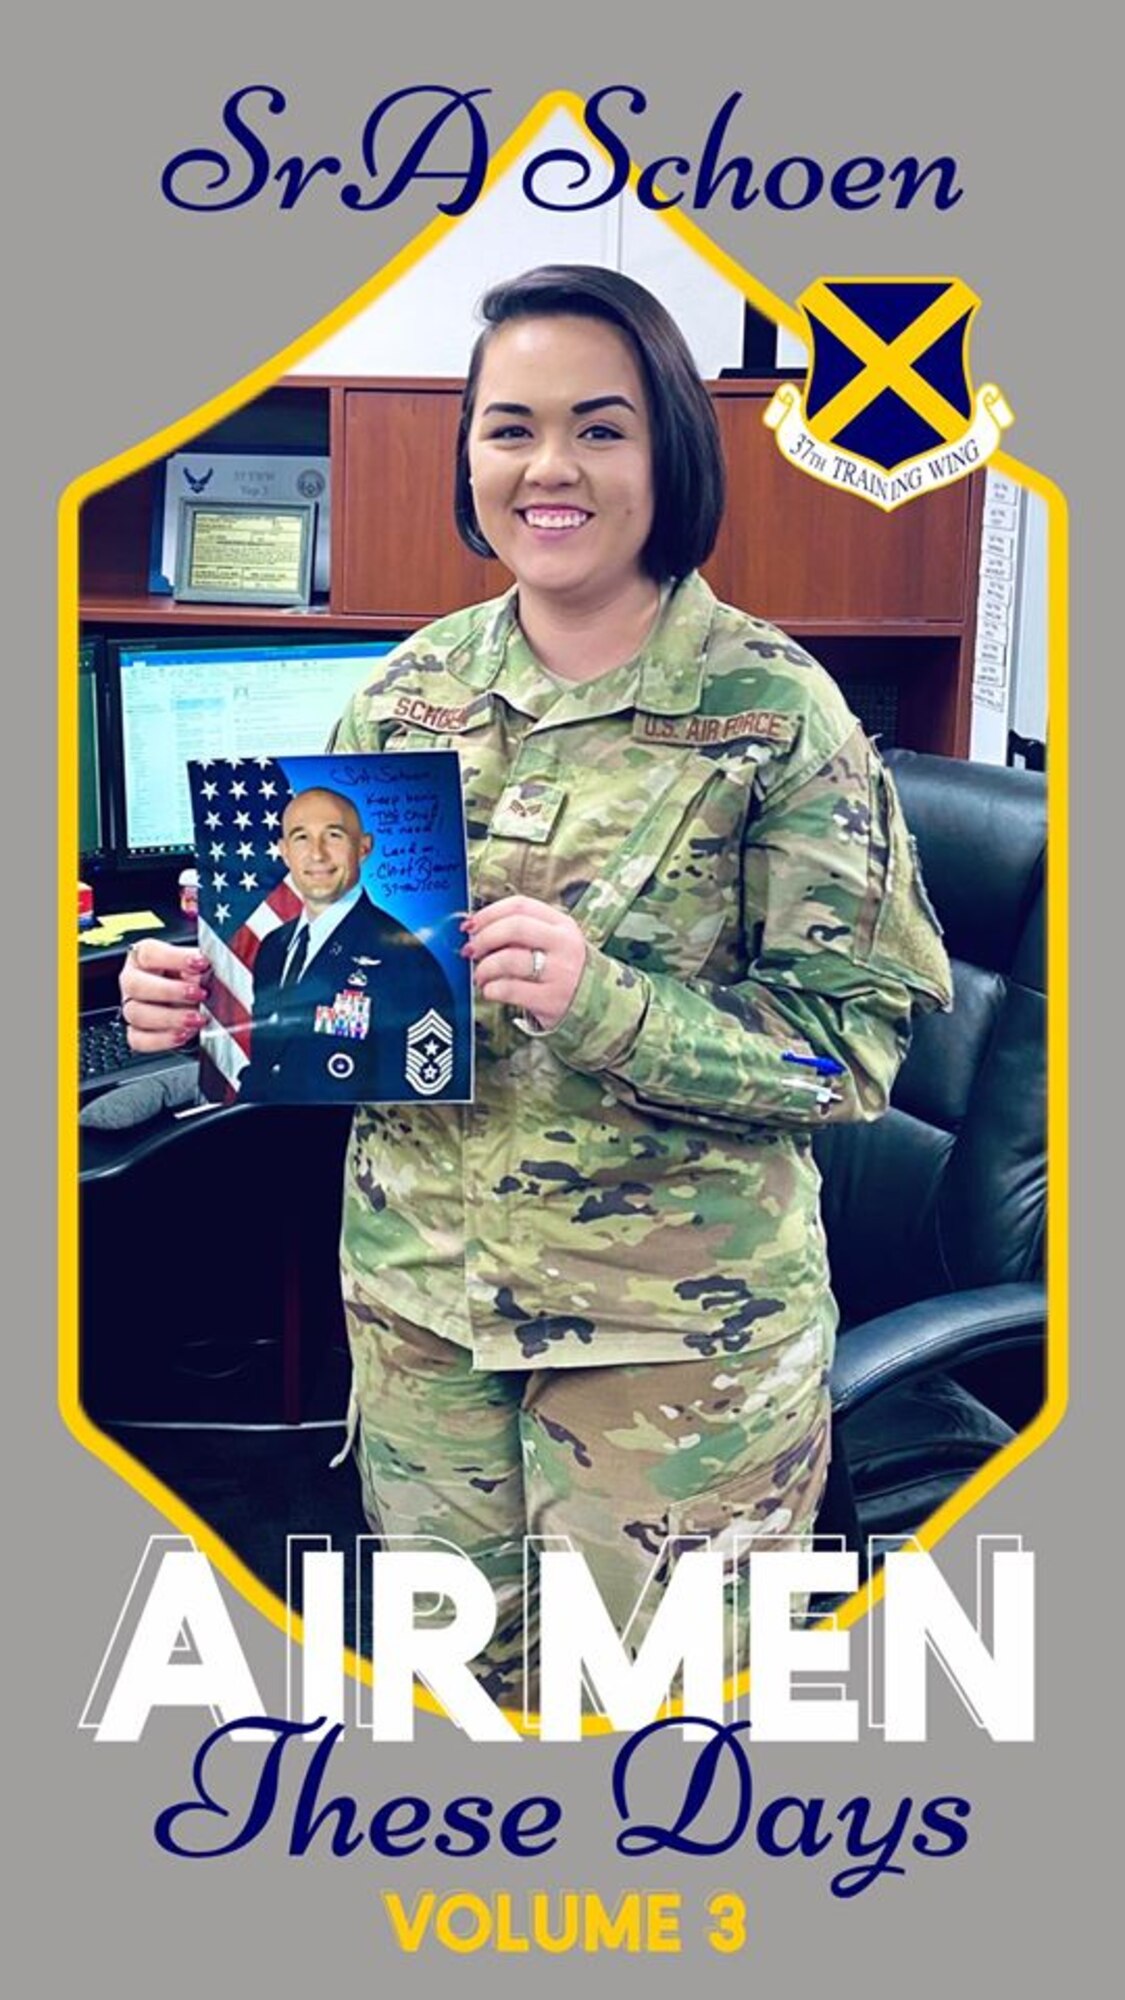 Senior Airman Jordyn Schoen holds the official photo of 37th Training Wing Command Chief, Chief Master Sgt. Stefan Blazier to motivate her to one day become a command chief herself.